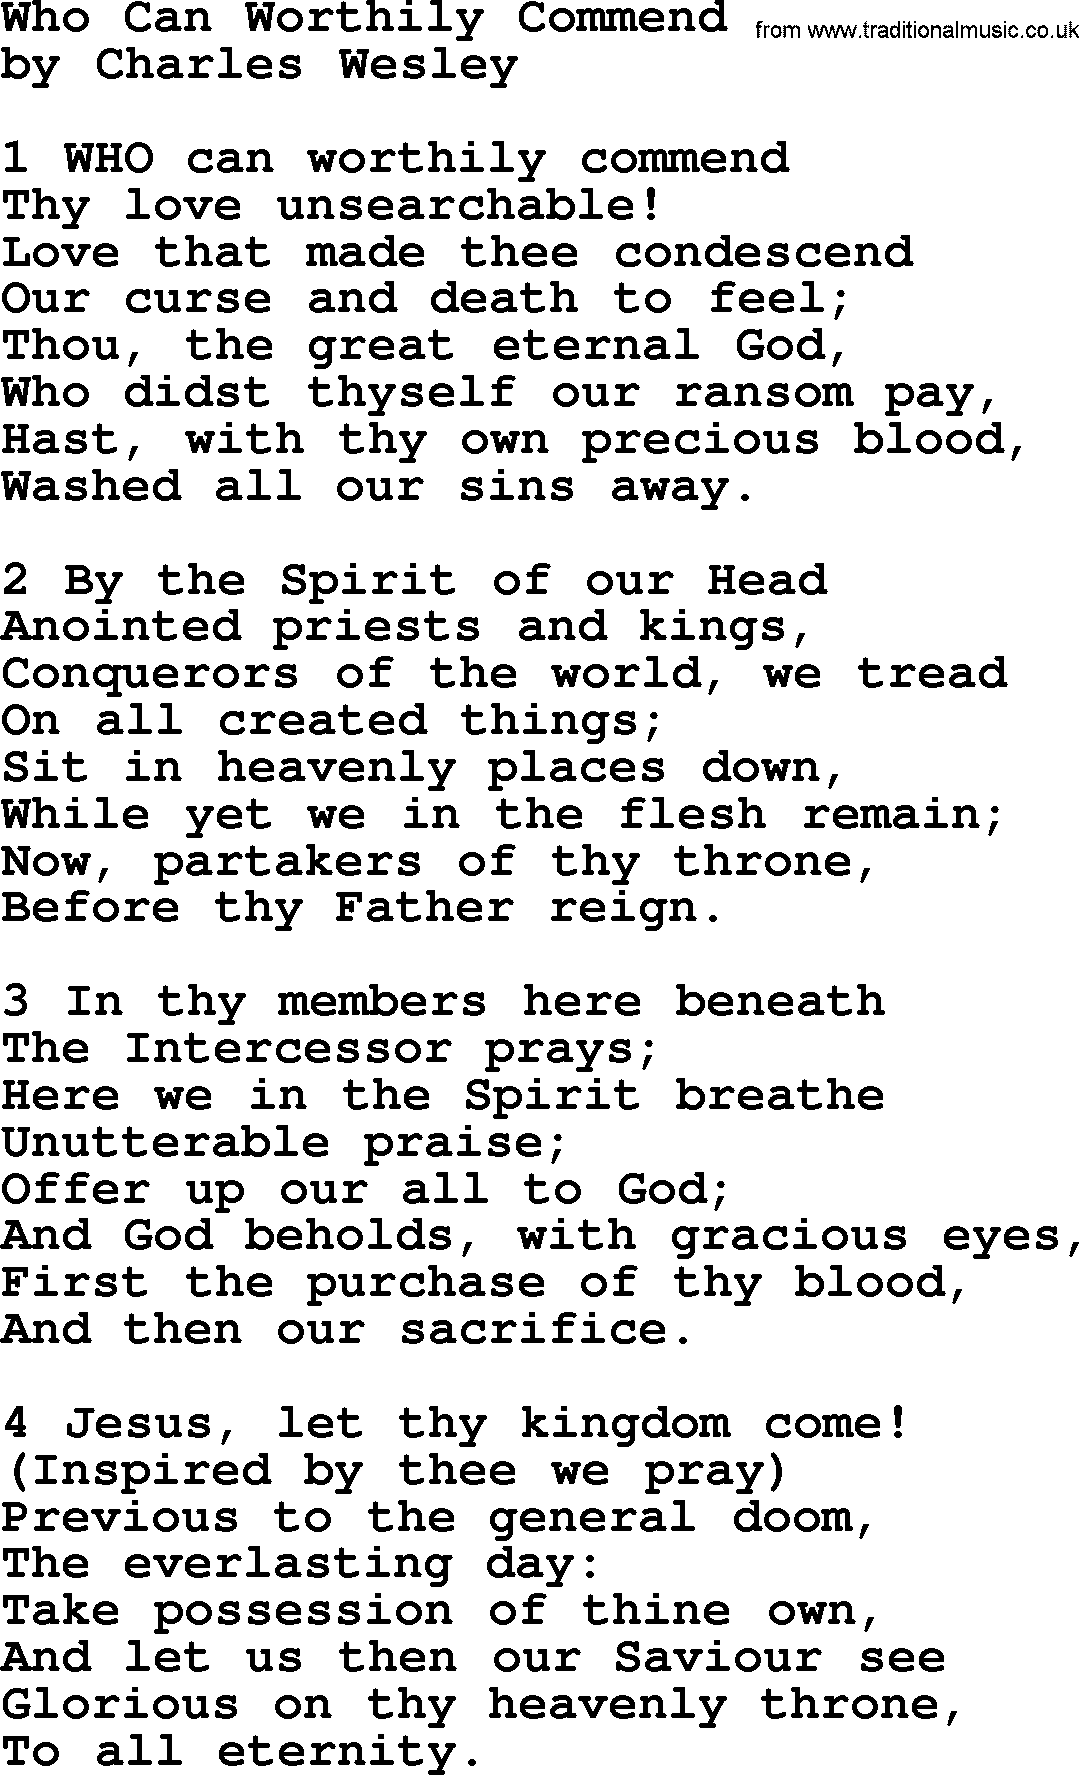 Charles Wesley hymn: Who Can Worthily Commend, lyrics